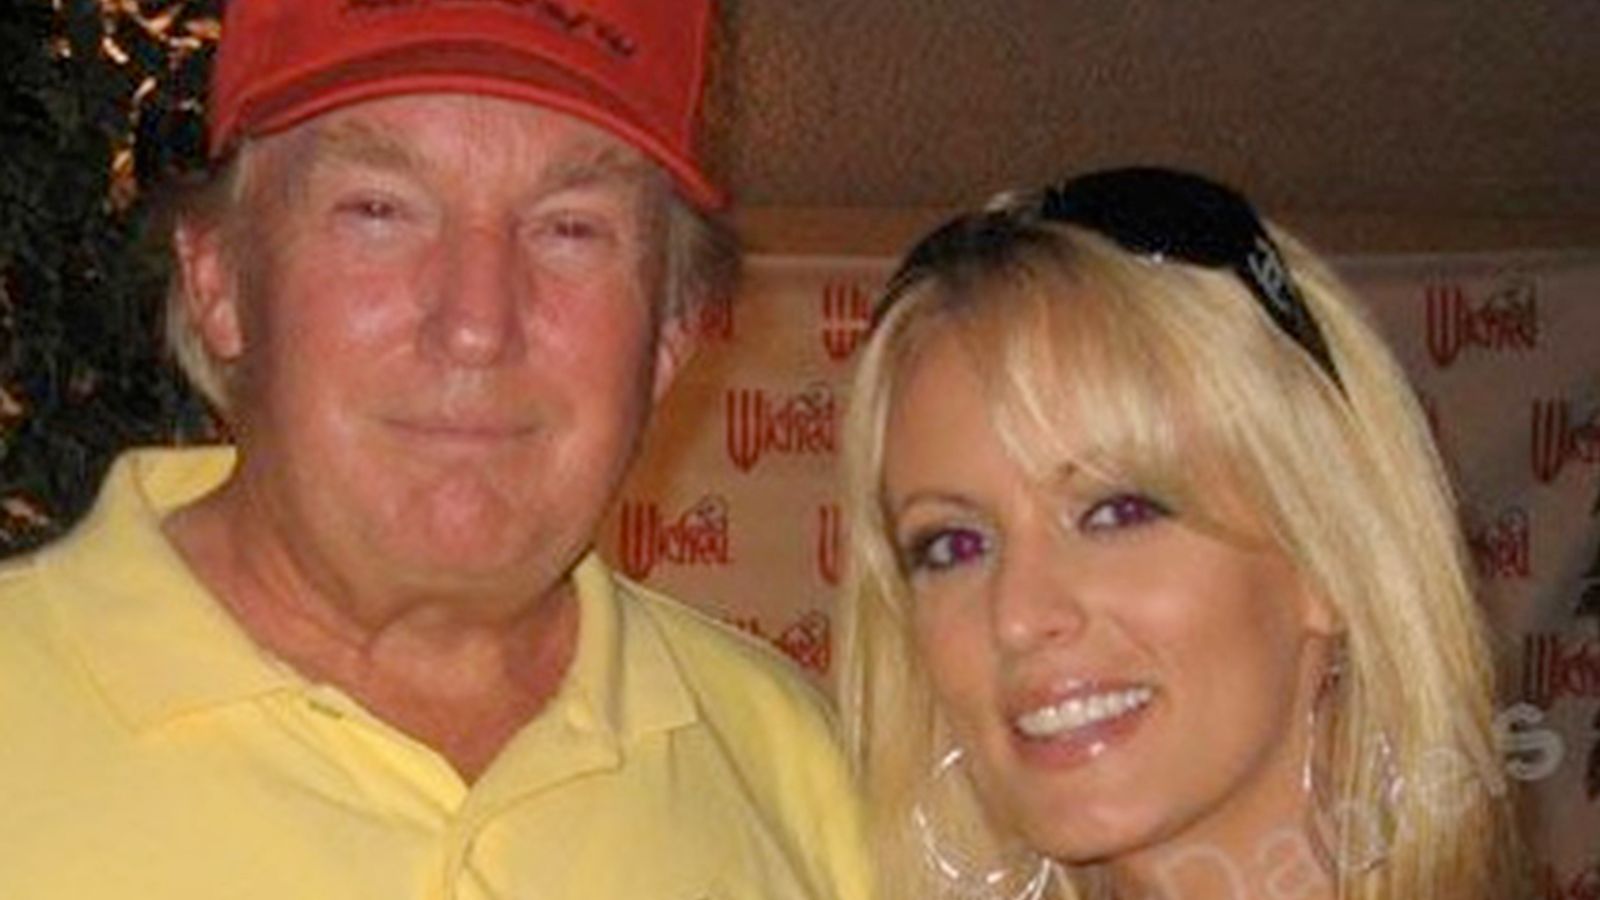 Donald Trump says he expects to be arrested over hush money paid to Stormy Daniels